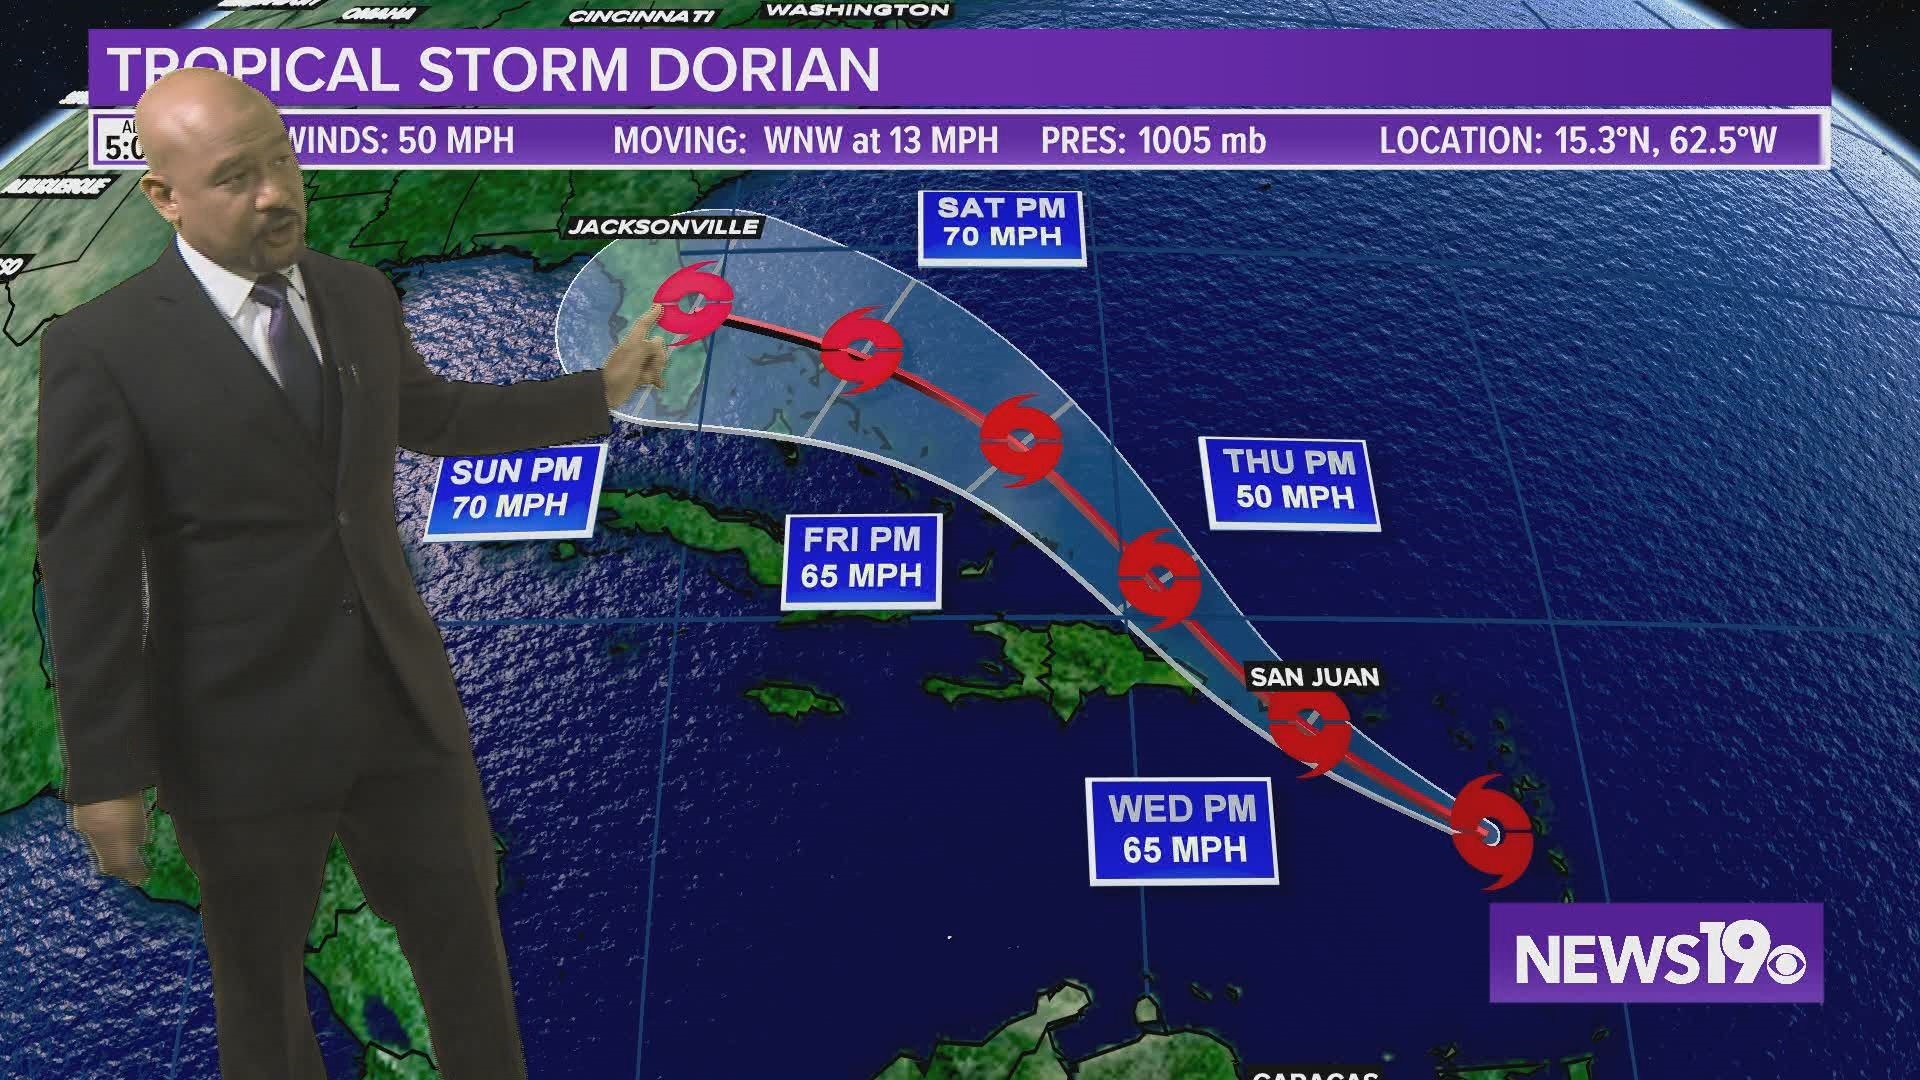 Tropical Storm Dorian continues to move past the islands of the Caribbean. The current forecast models have it moving into Florida over the weekend.